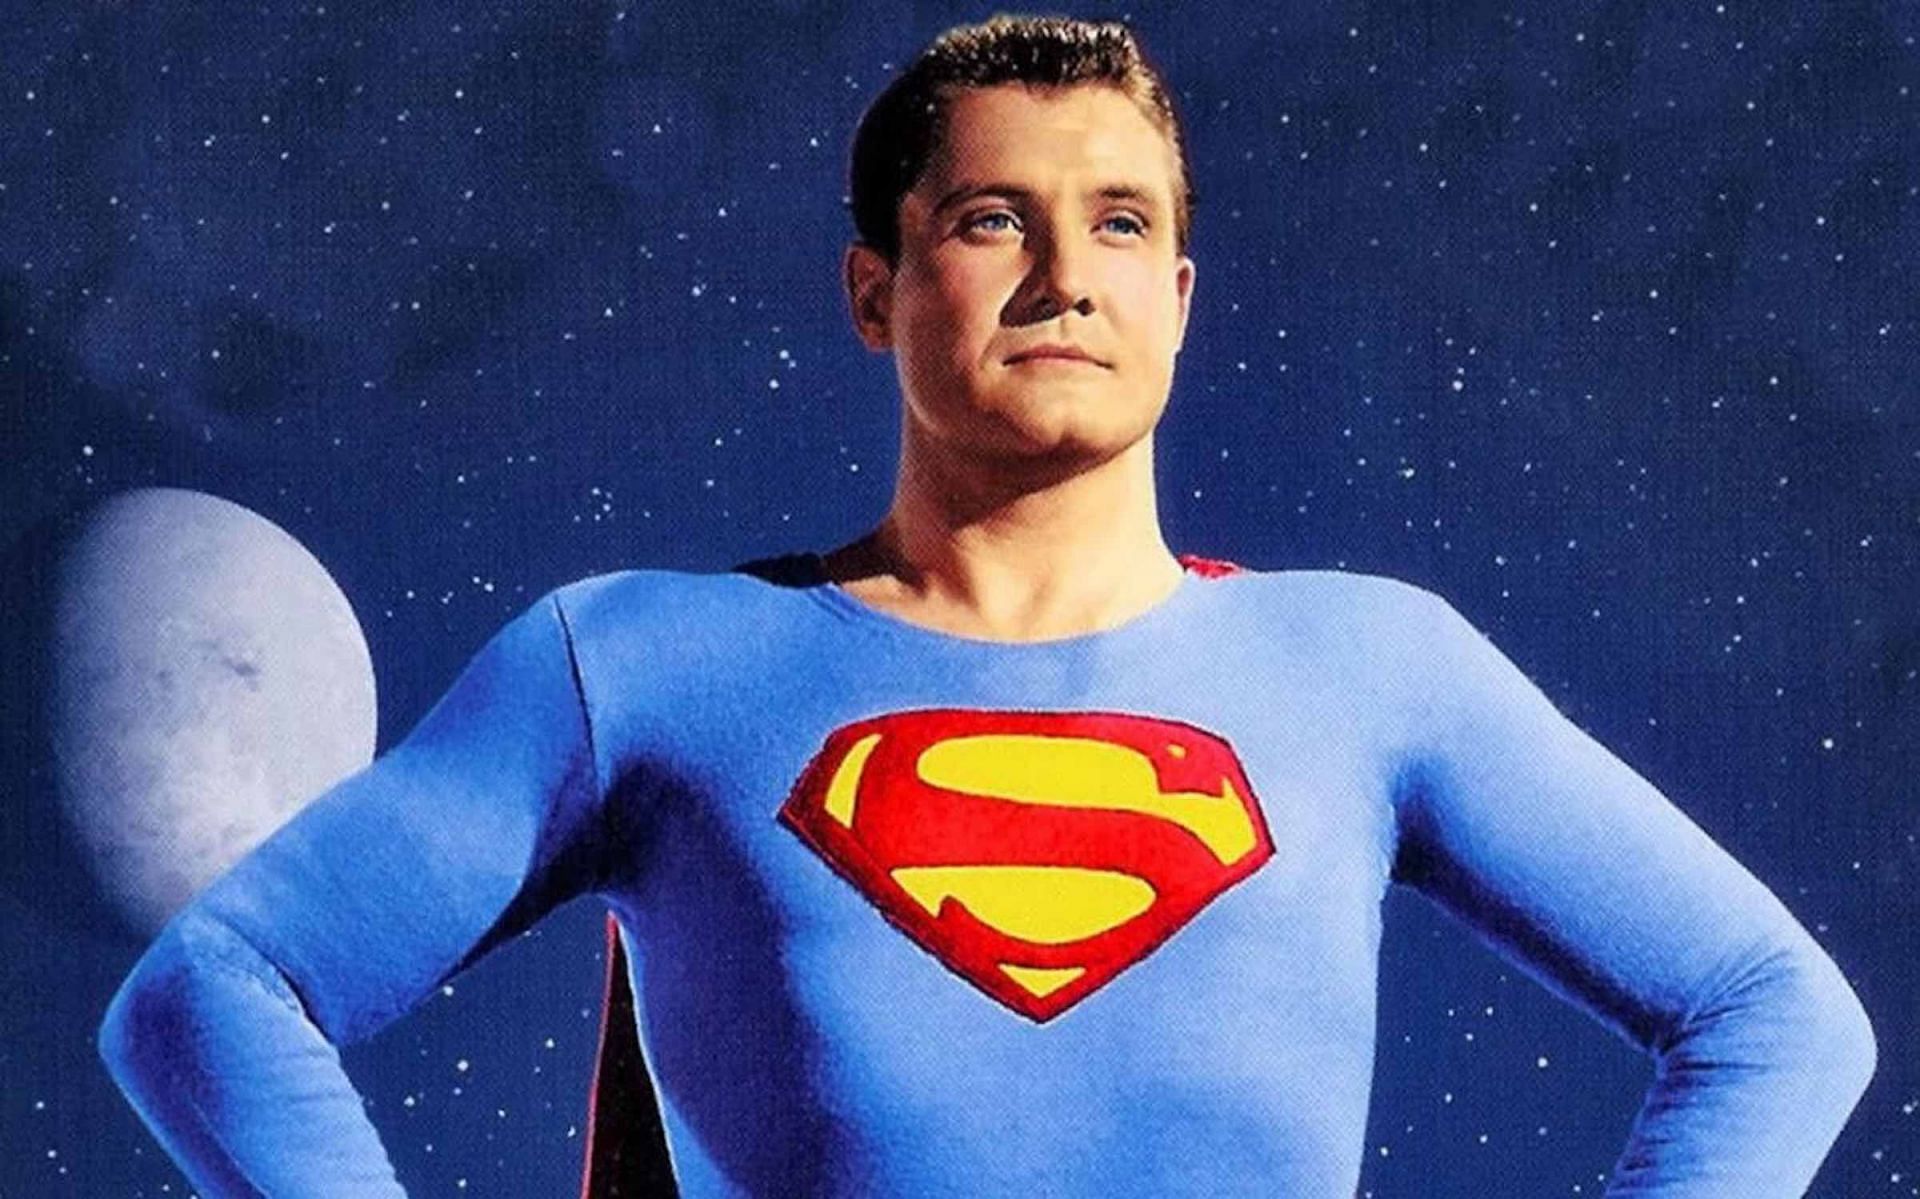 Reeves&#039; costume was better than the previous Superman costume design. (Image Via DC)